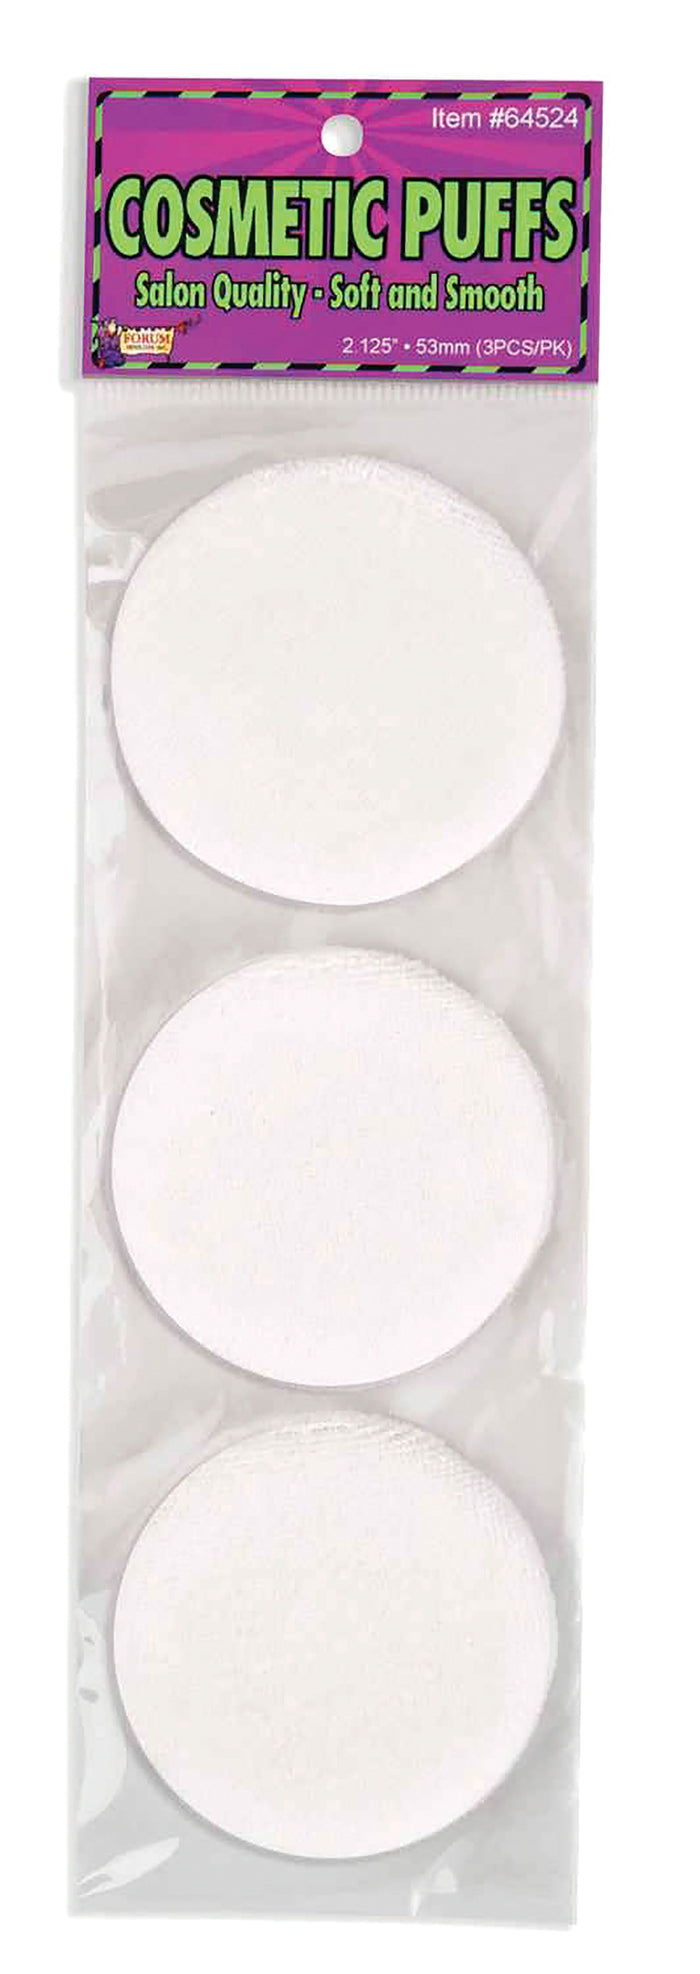 Cosmetic Puffs (Face Paint) - Pack of 3